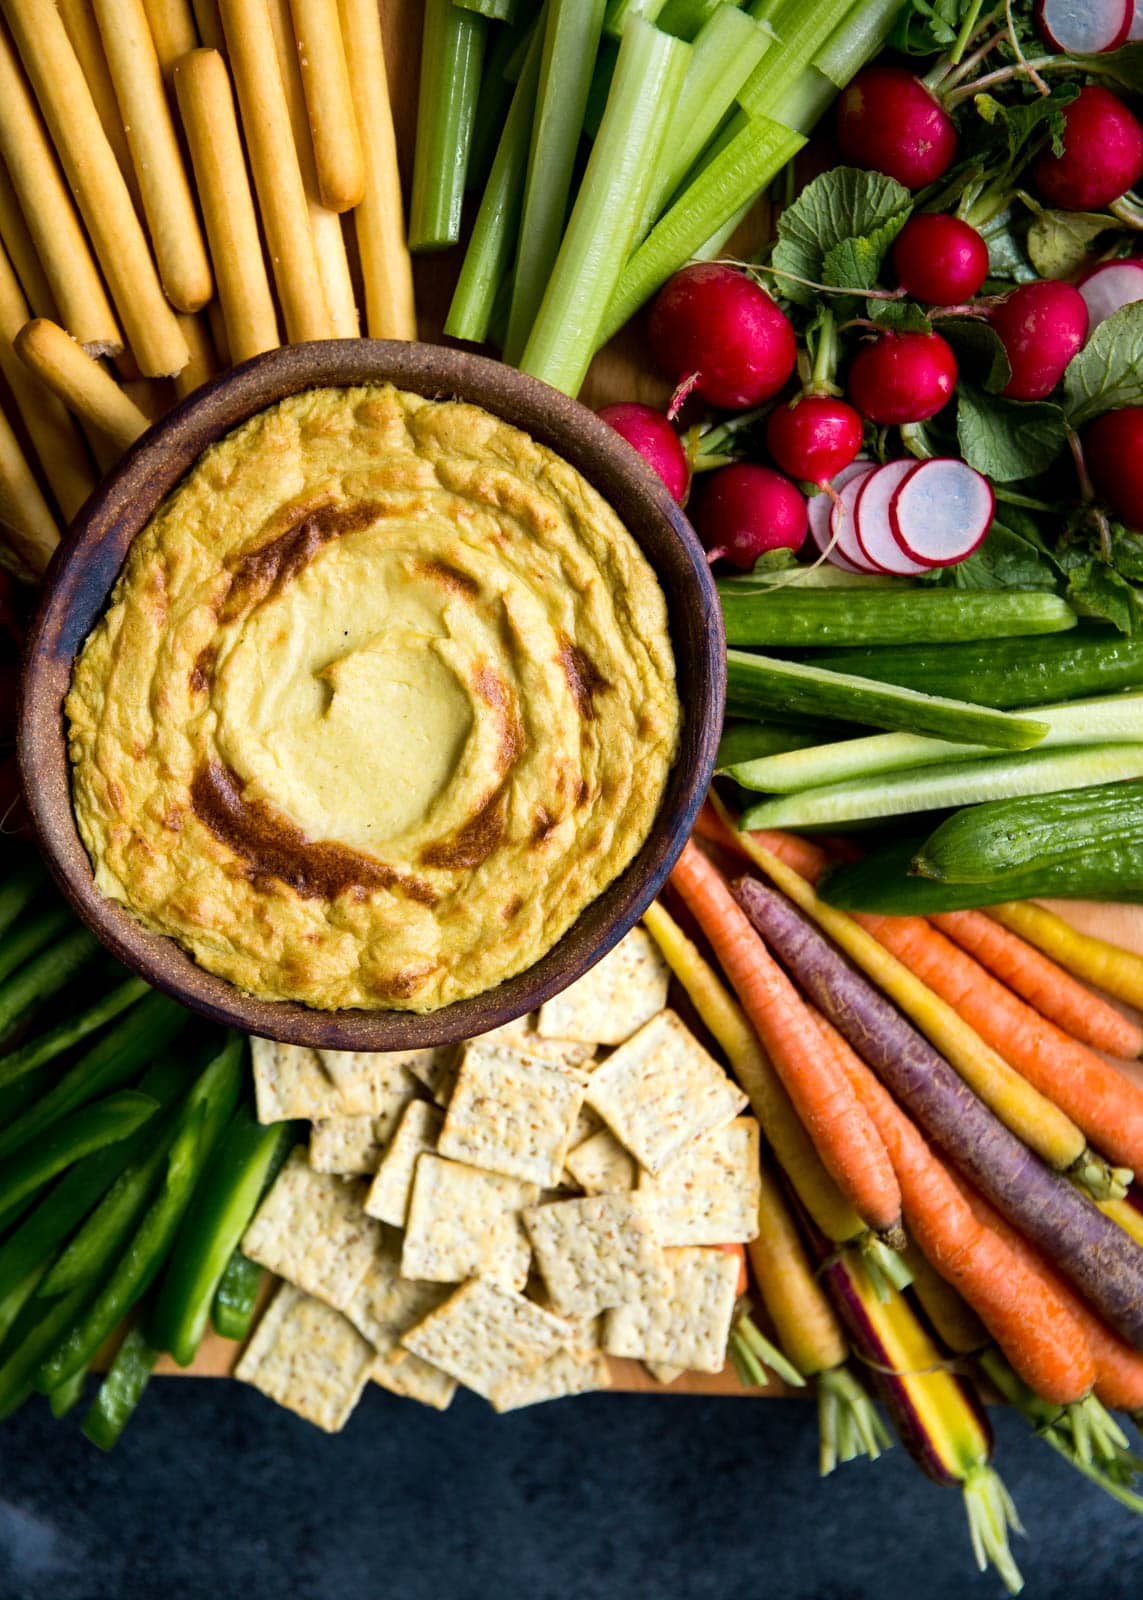 Mom's creamy, cheesy Artichoke Dip with a bountiful crudités is perfect for a crowd.